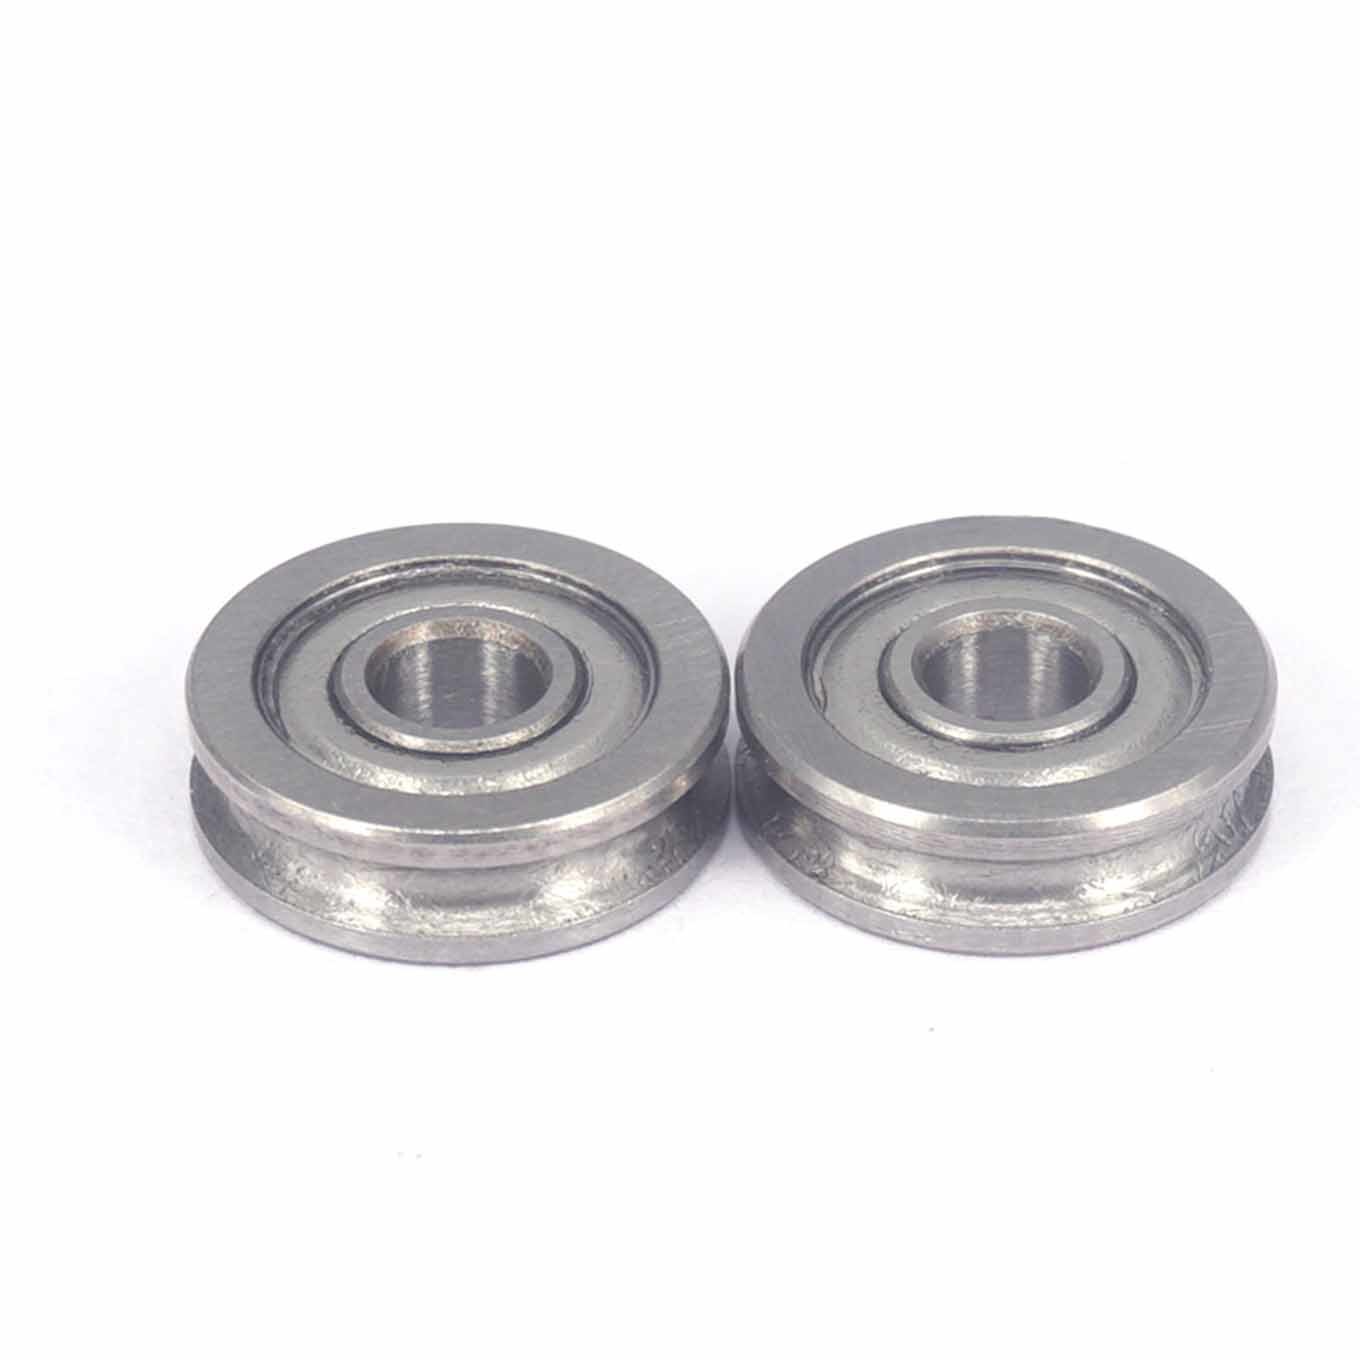 Buy cheap 4x13x4mm Carbon Steel U604ZZ U Groove Pulley Wheels For 3D Printer from wholesalers